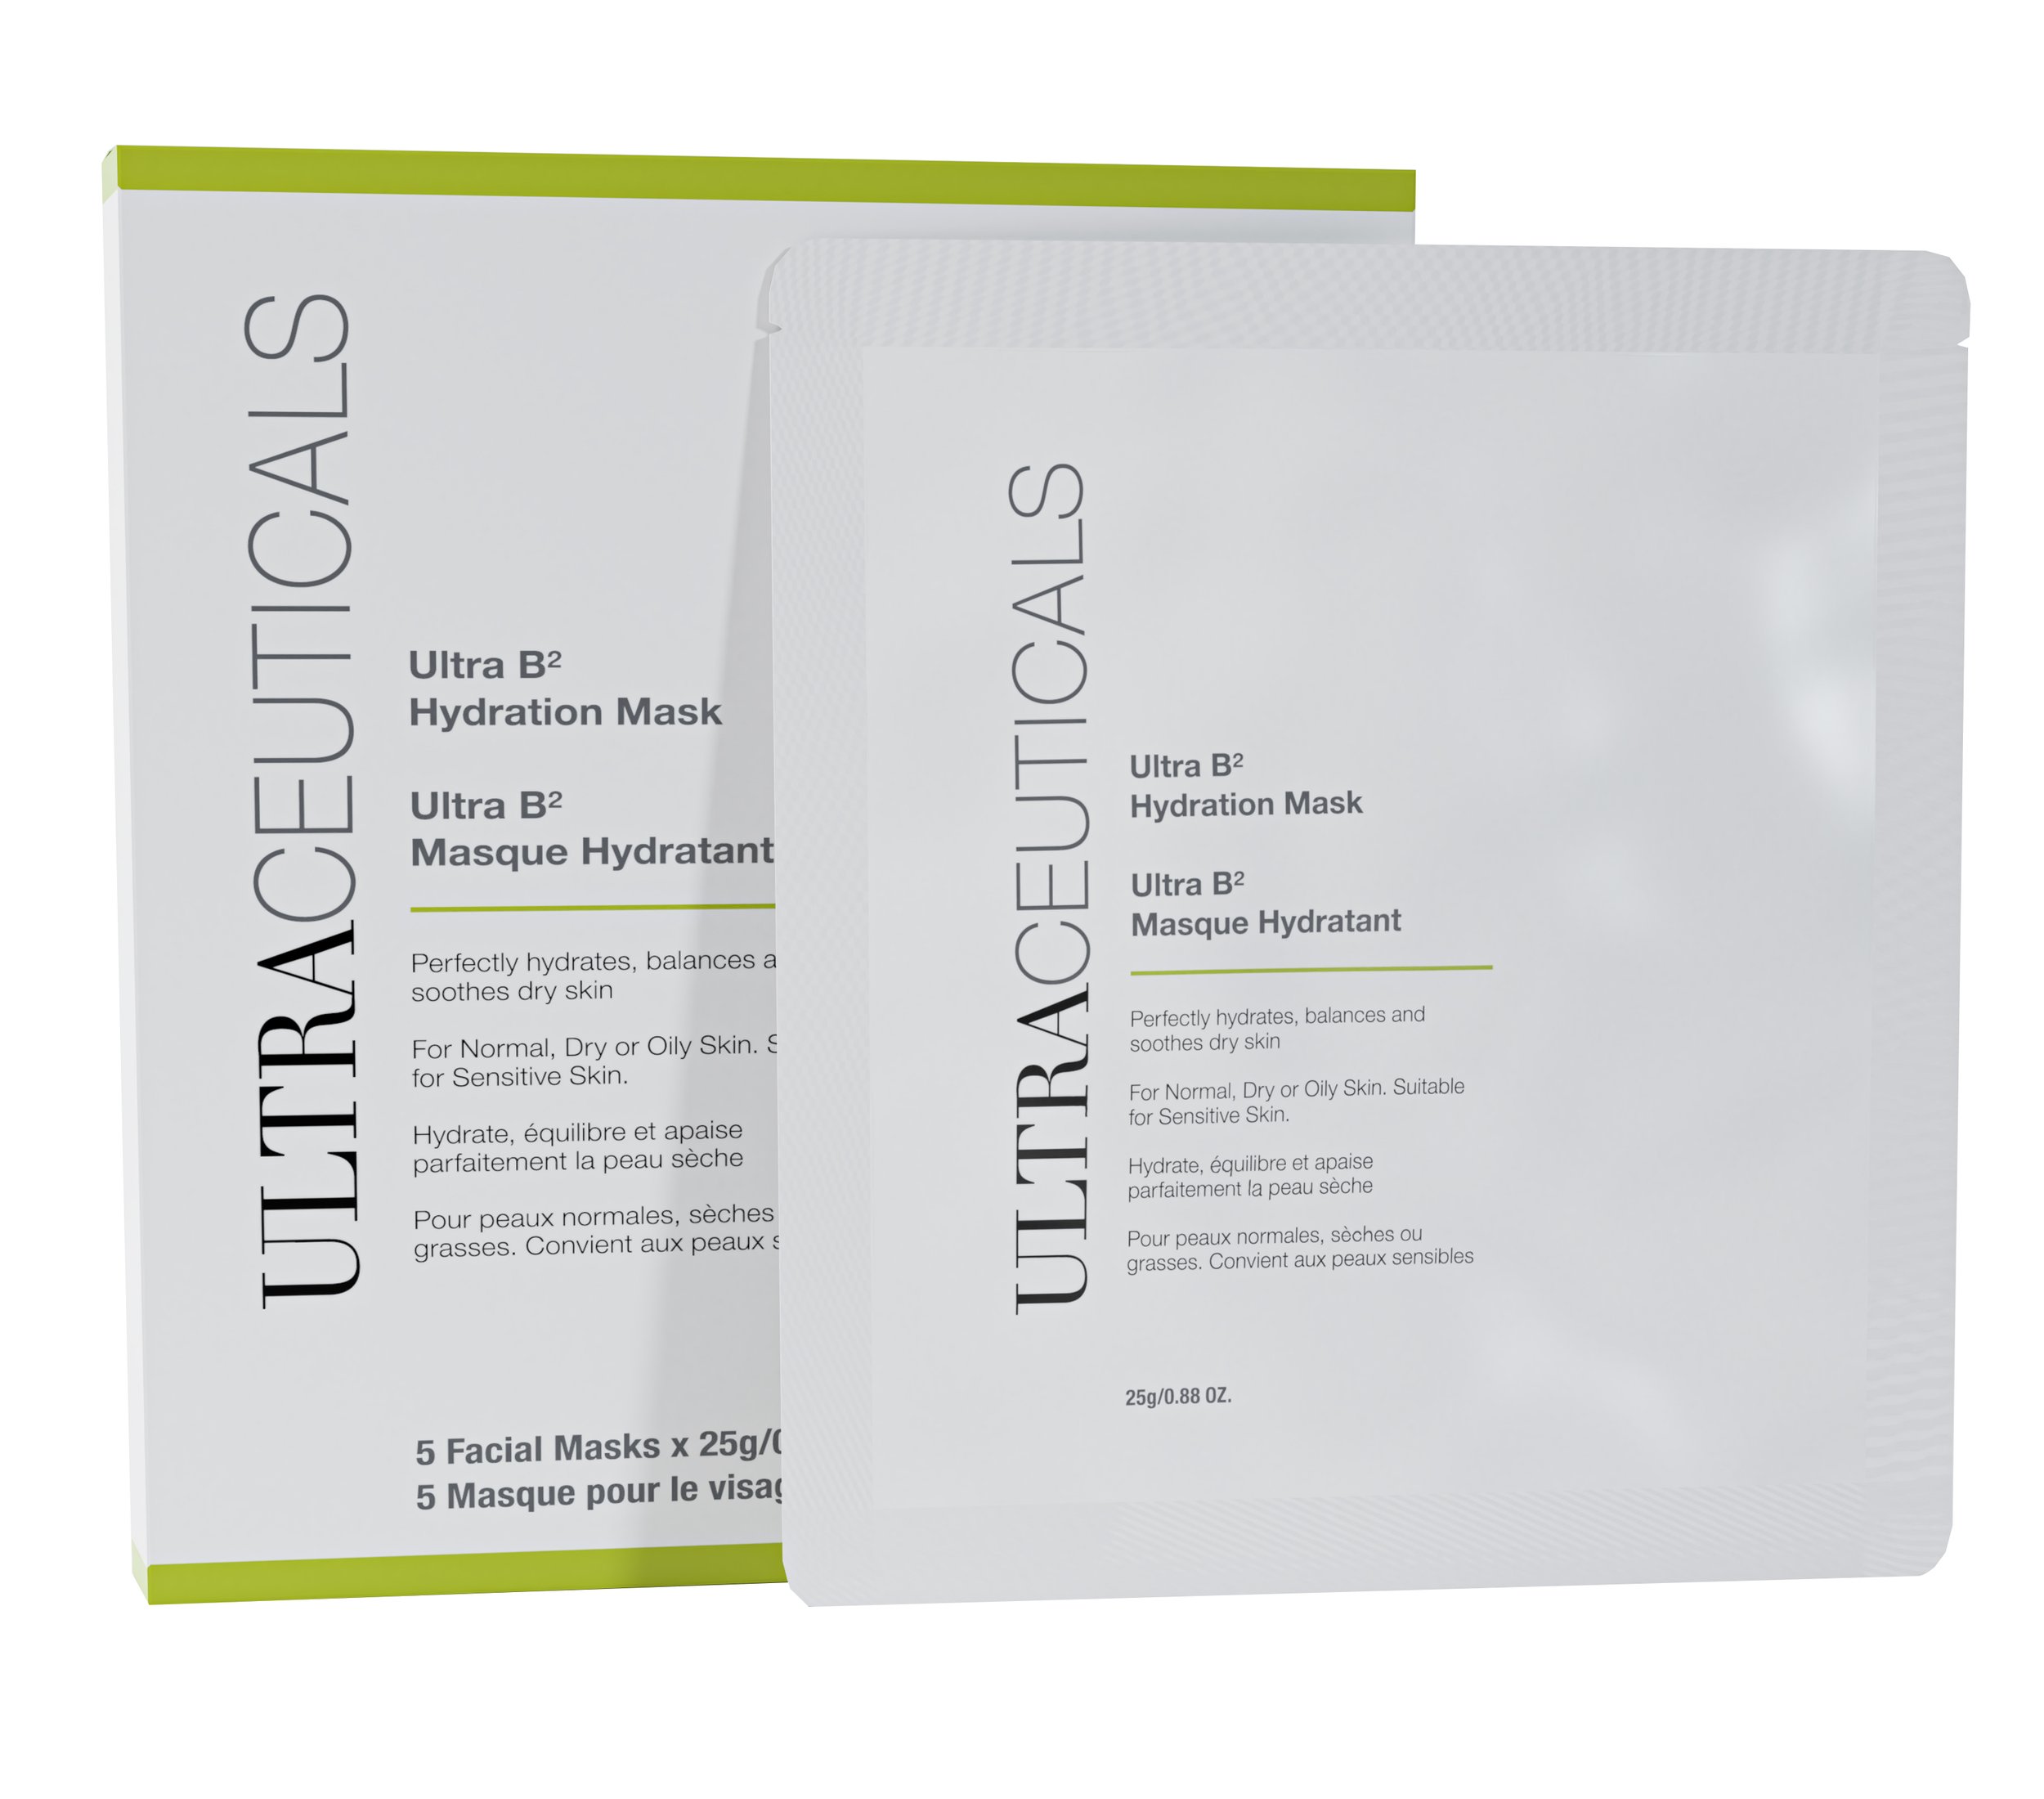 Ultraceuticals B2 Hydration Mask €95 